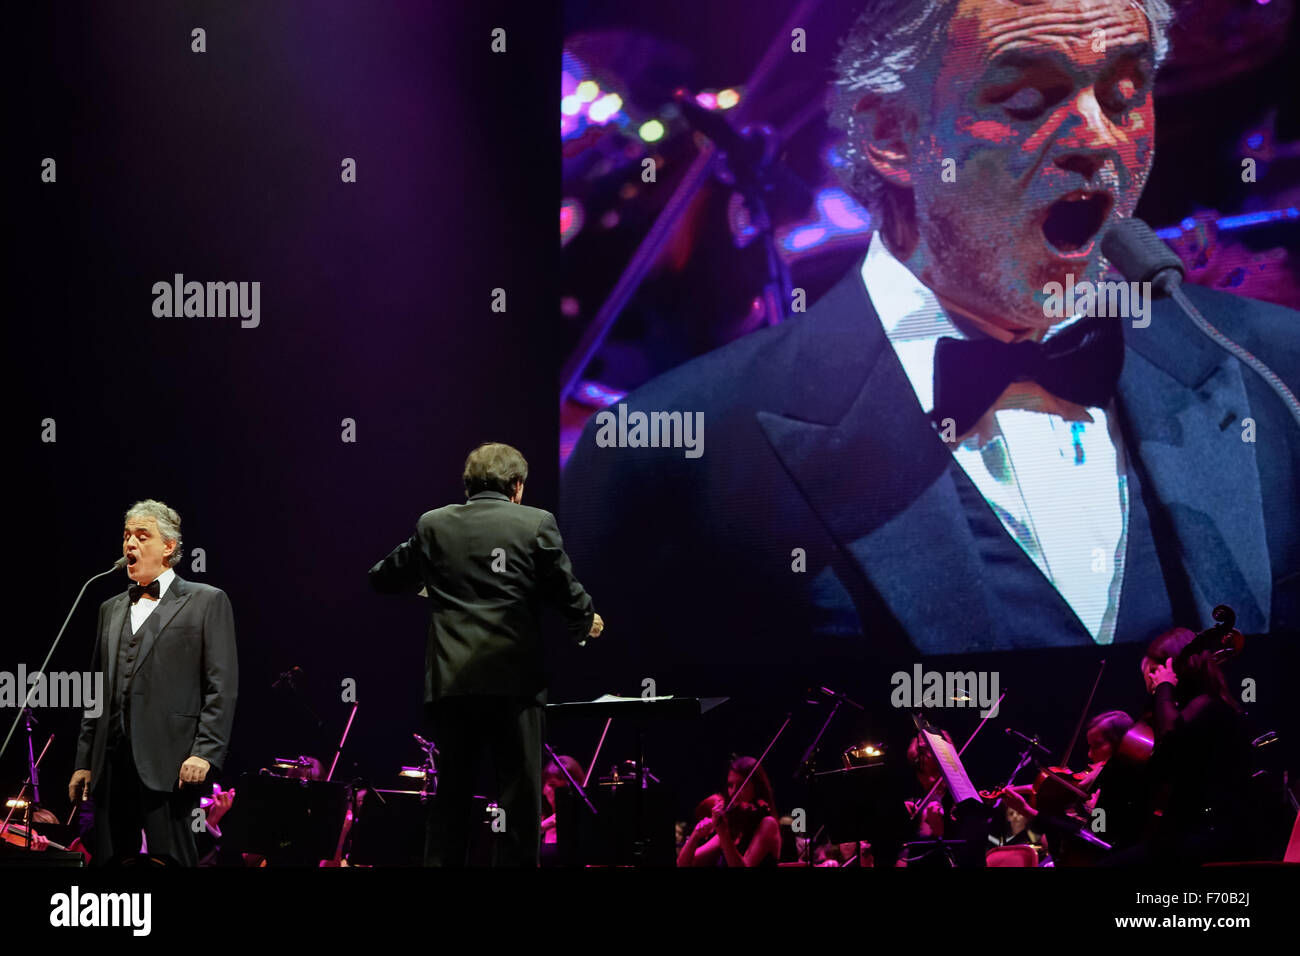 Budapest. 22nd Nov, 2015. Italian tenor Andrea Bocelli sings at a concert in Papp Laszlo Sports Arena in Budapest, Hungary on Nov. 22, 2015. © Attila Volgyi/Xinhua/Alamy Live News Stock Photo